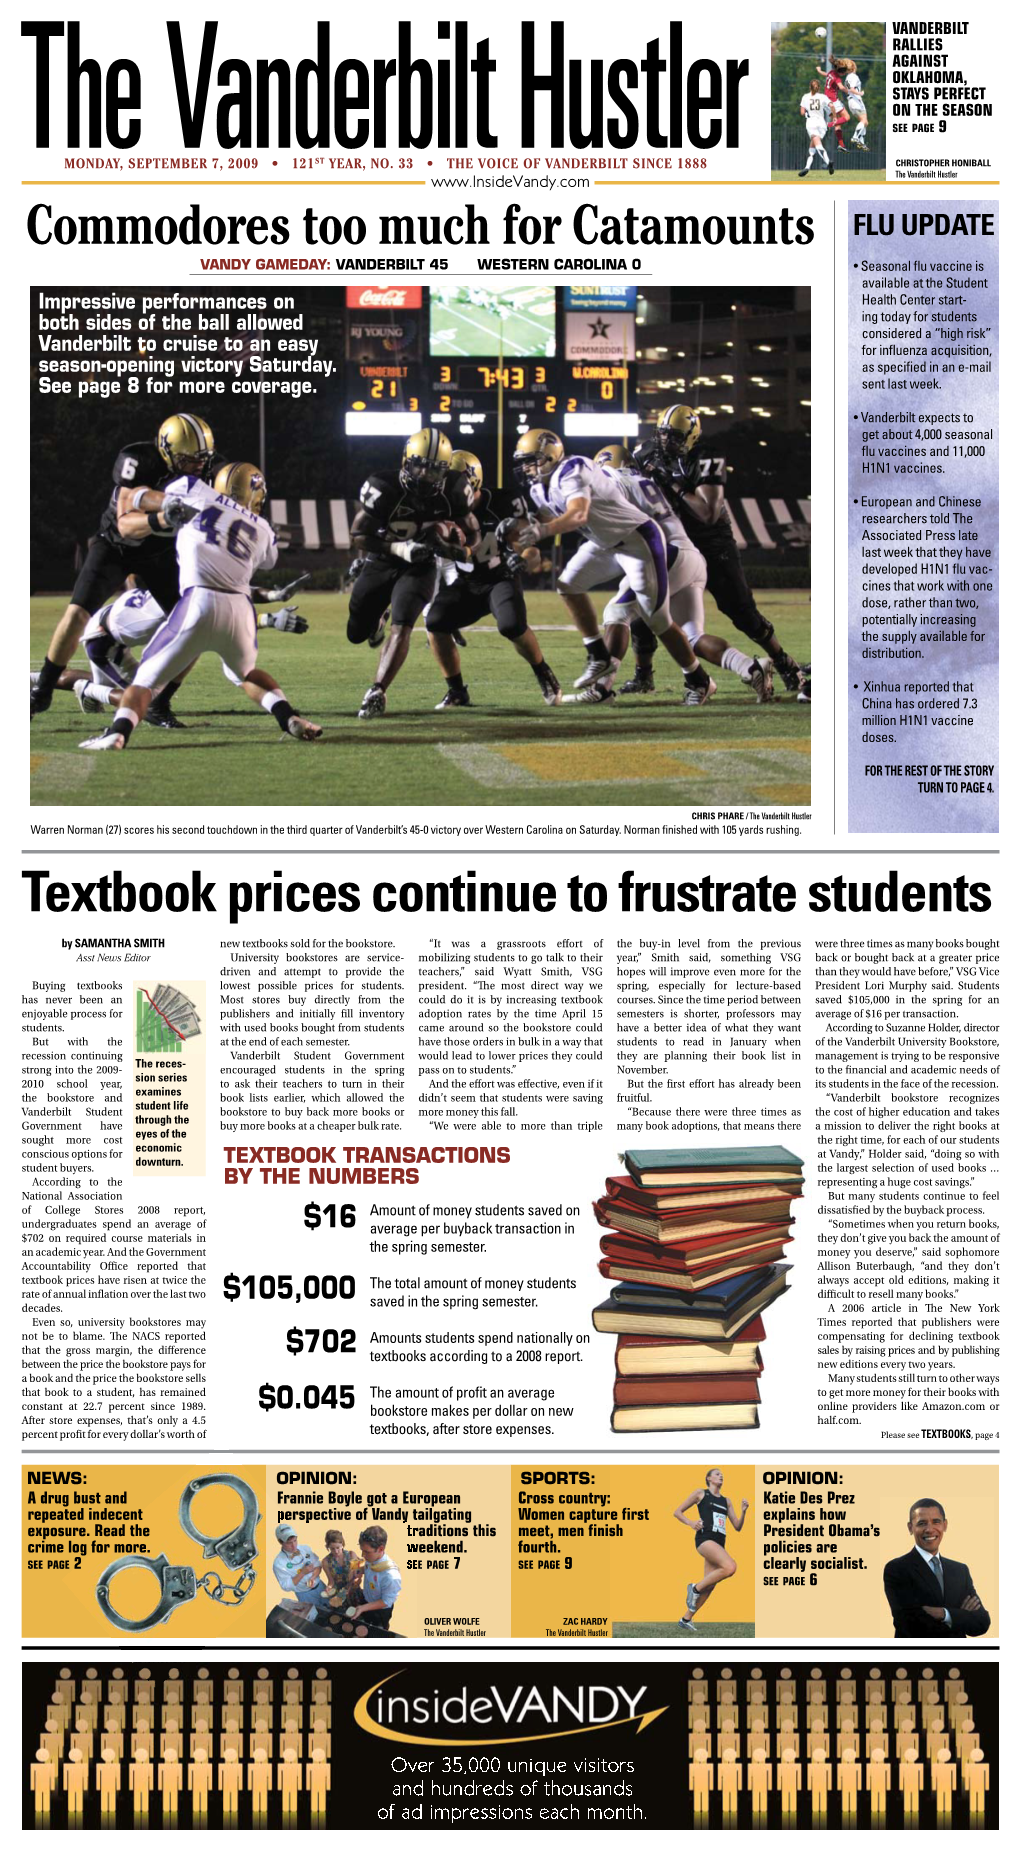 Commodores Too Much for Catamounts Textbook Prices